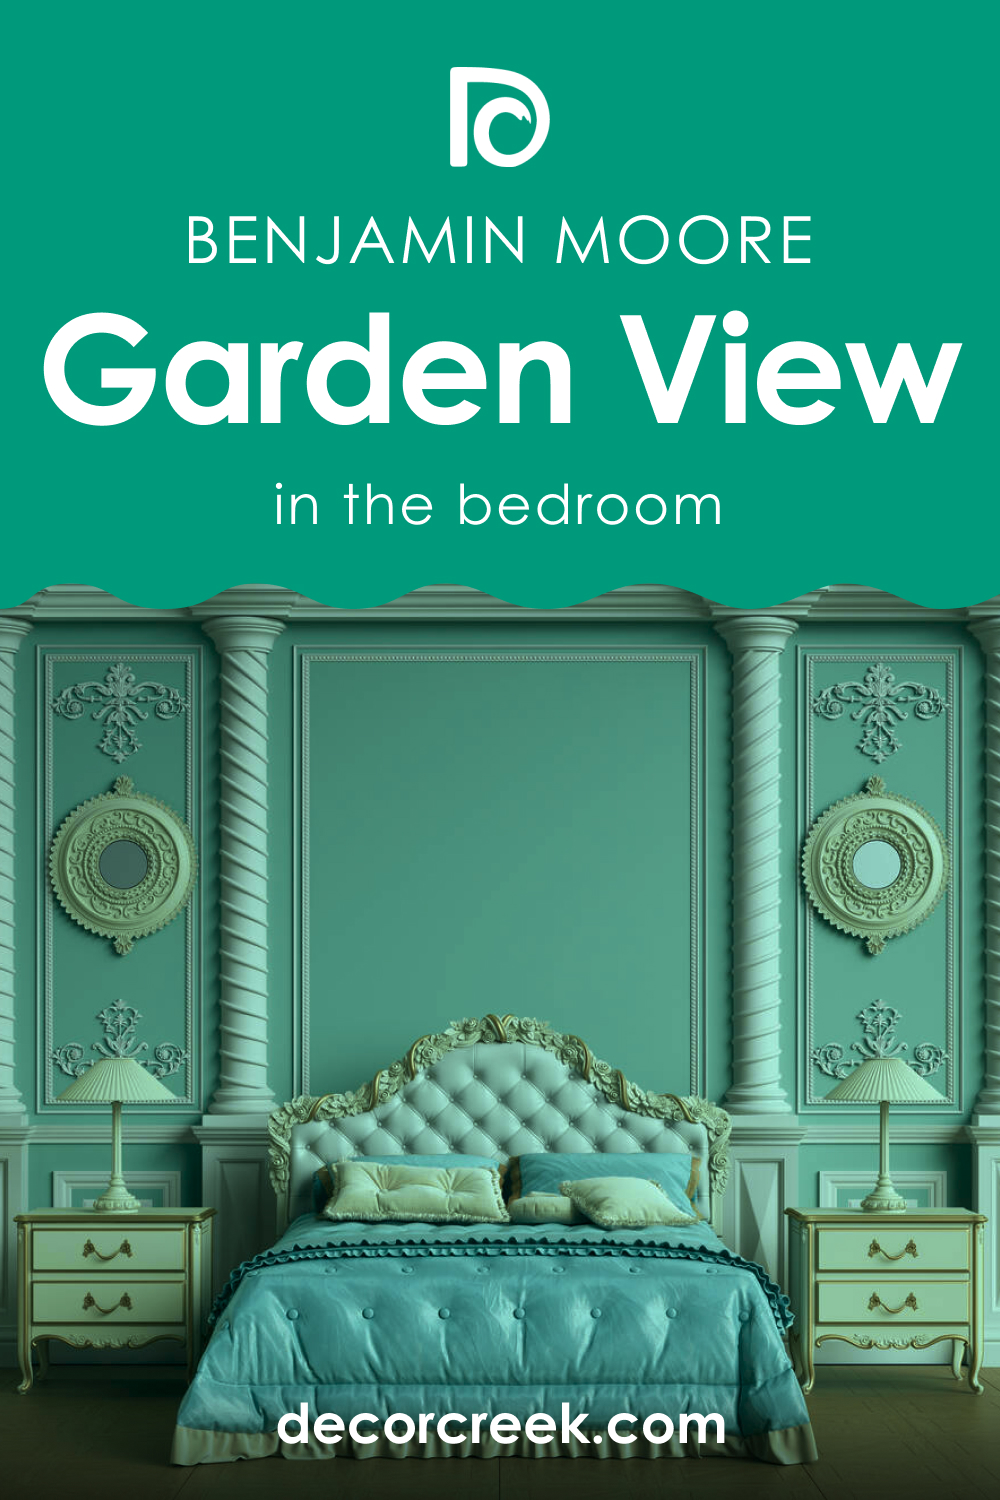 How to Use Garden View 616 in the Bedroom?